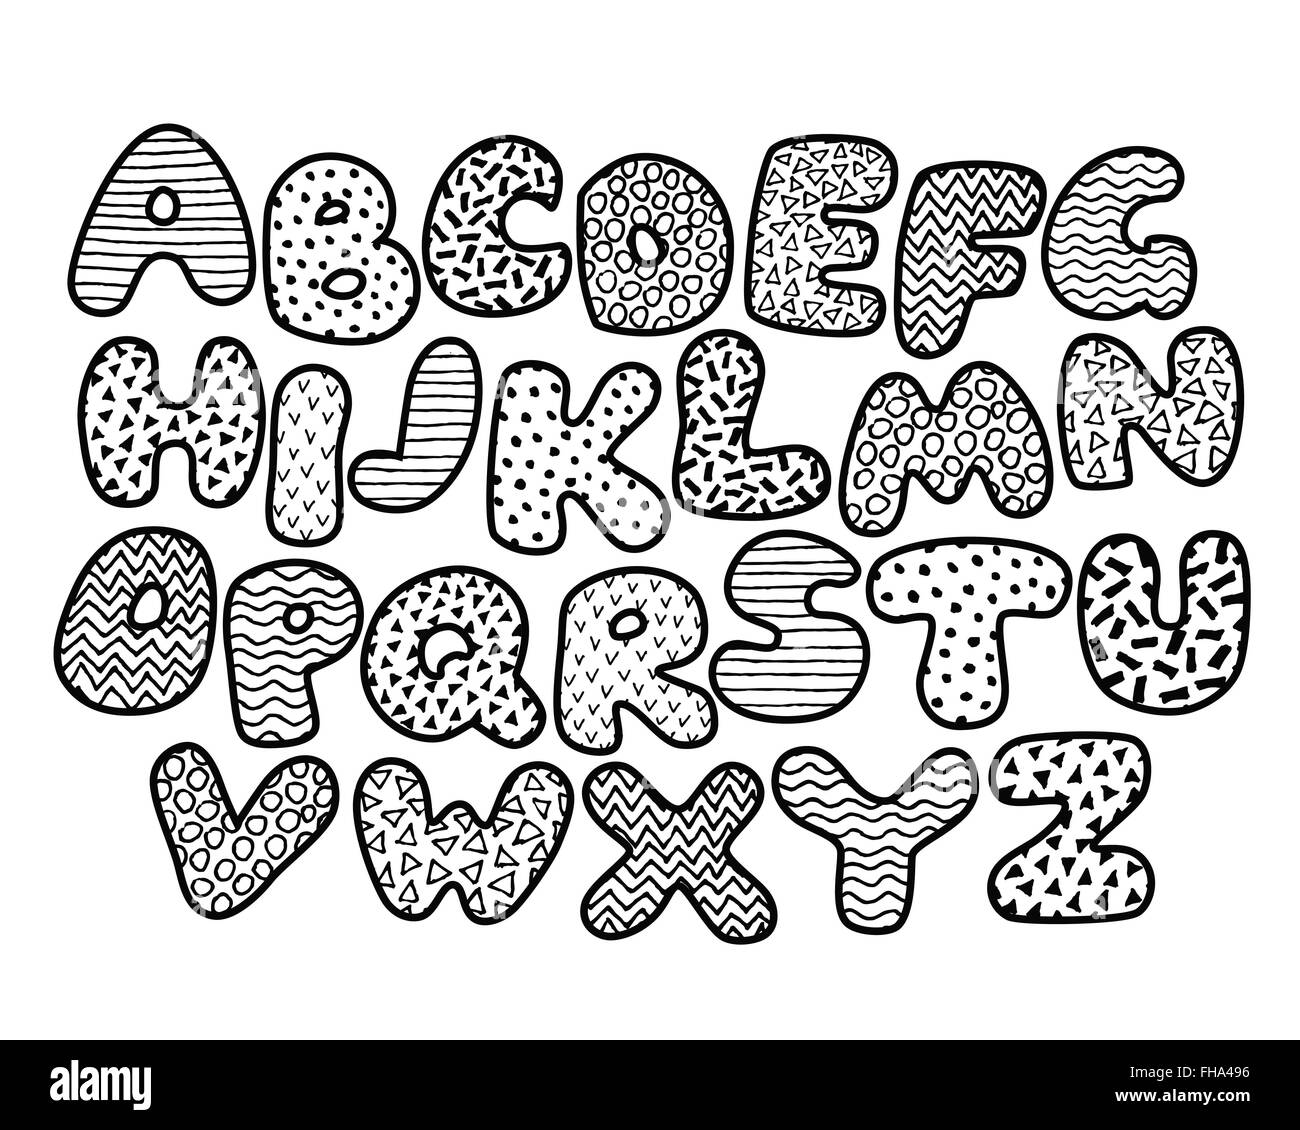 Funny Alphabet Coloring Page Stock Vector